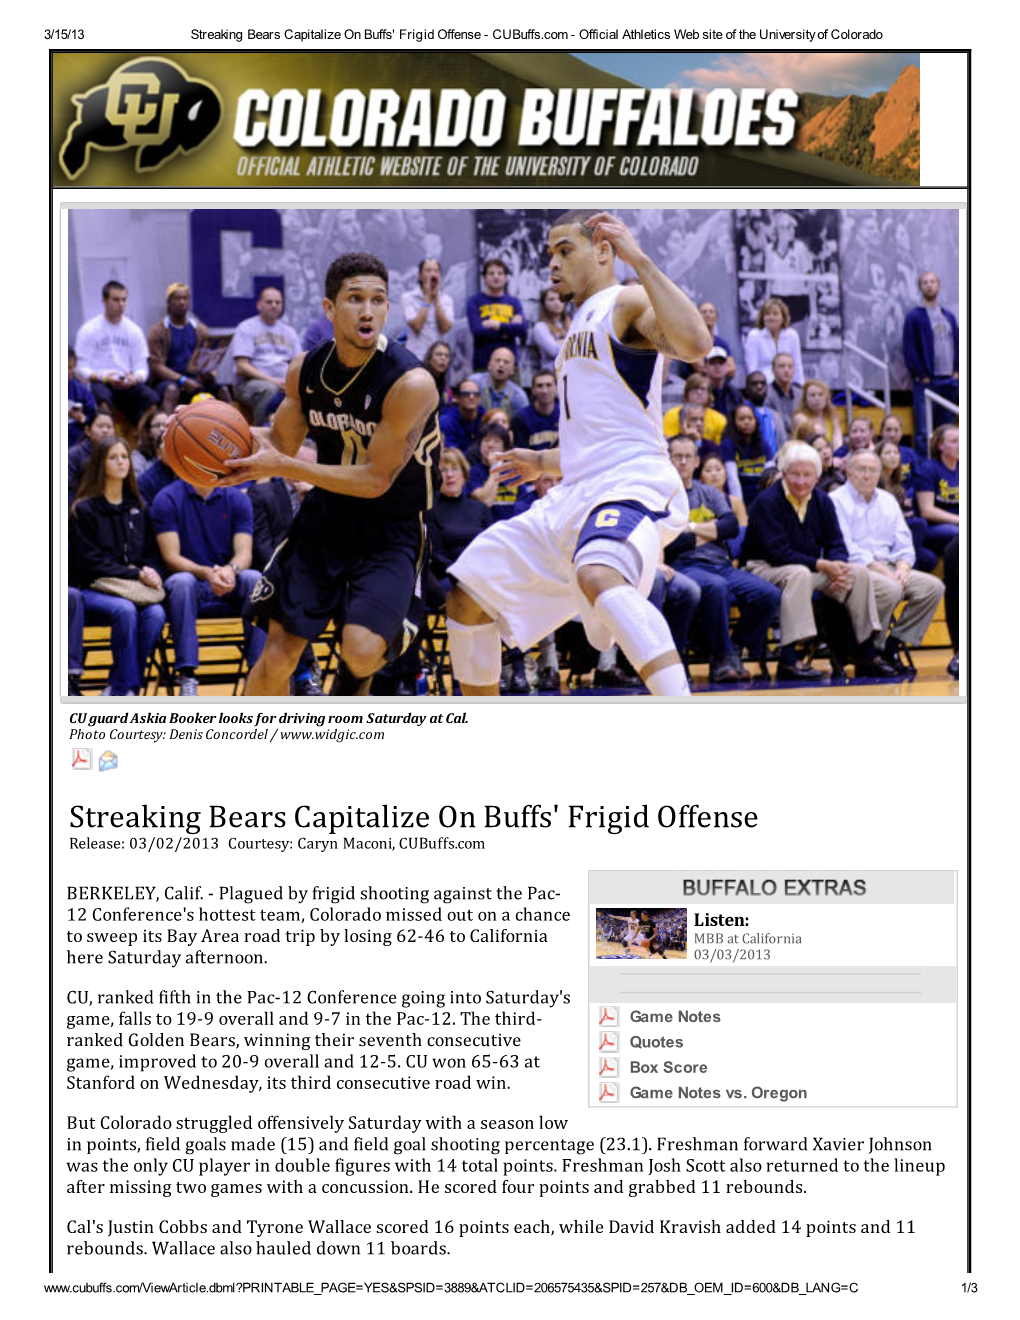 Streaking Bears Capitalize on Buffs' Frigid Offense - Cubuffs.Com - Official Athletics Web Site of the University of Colorado